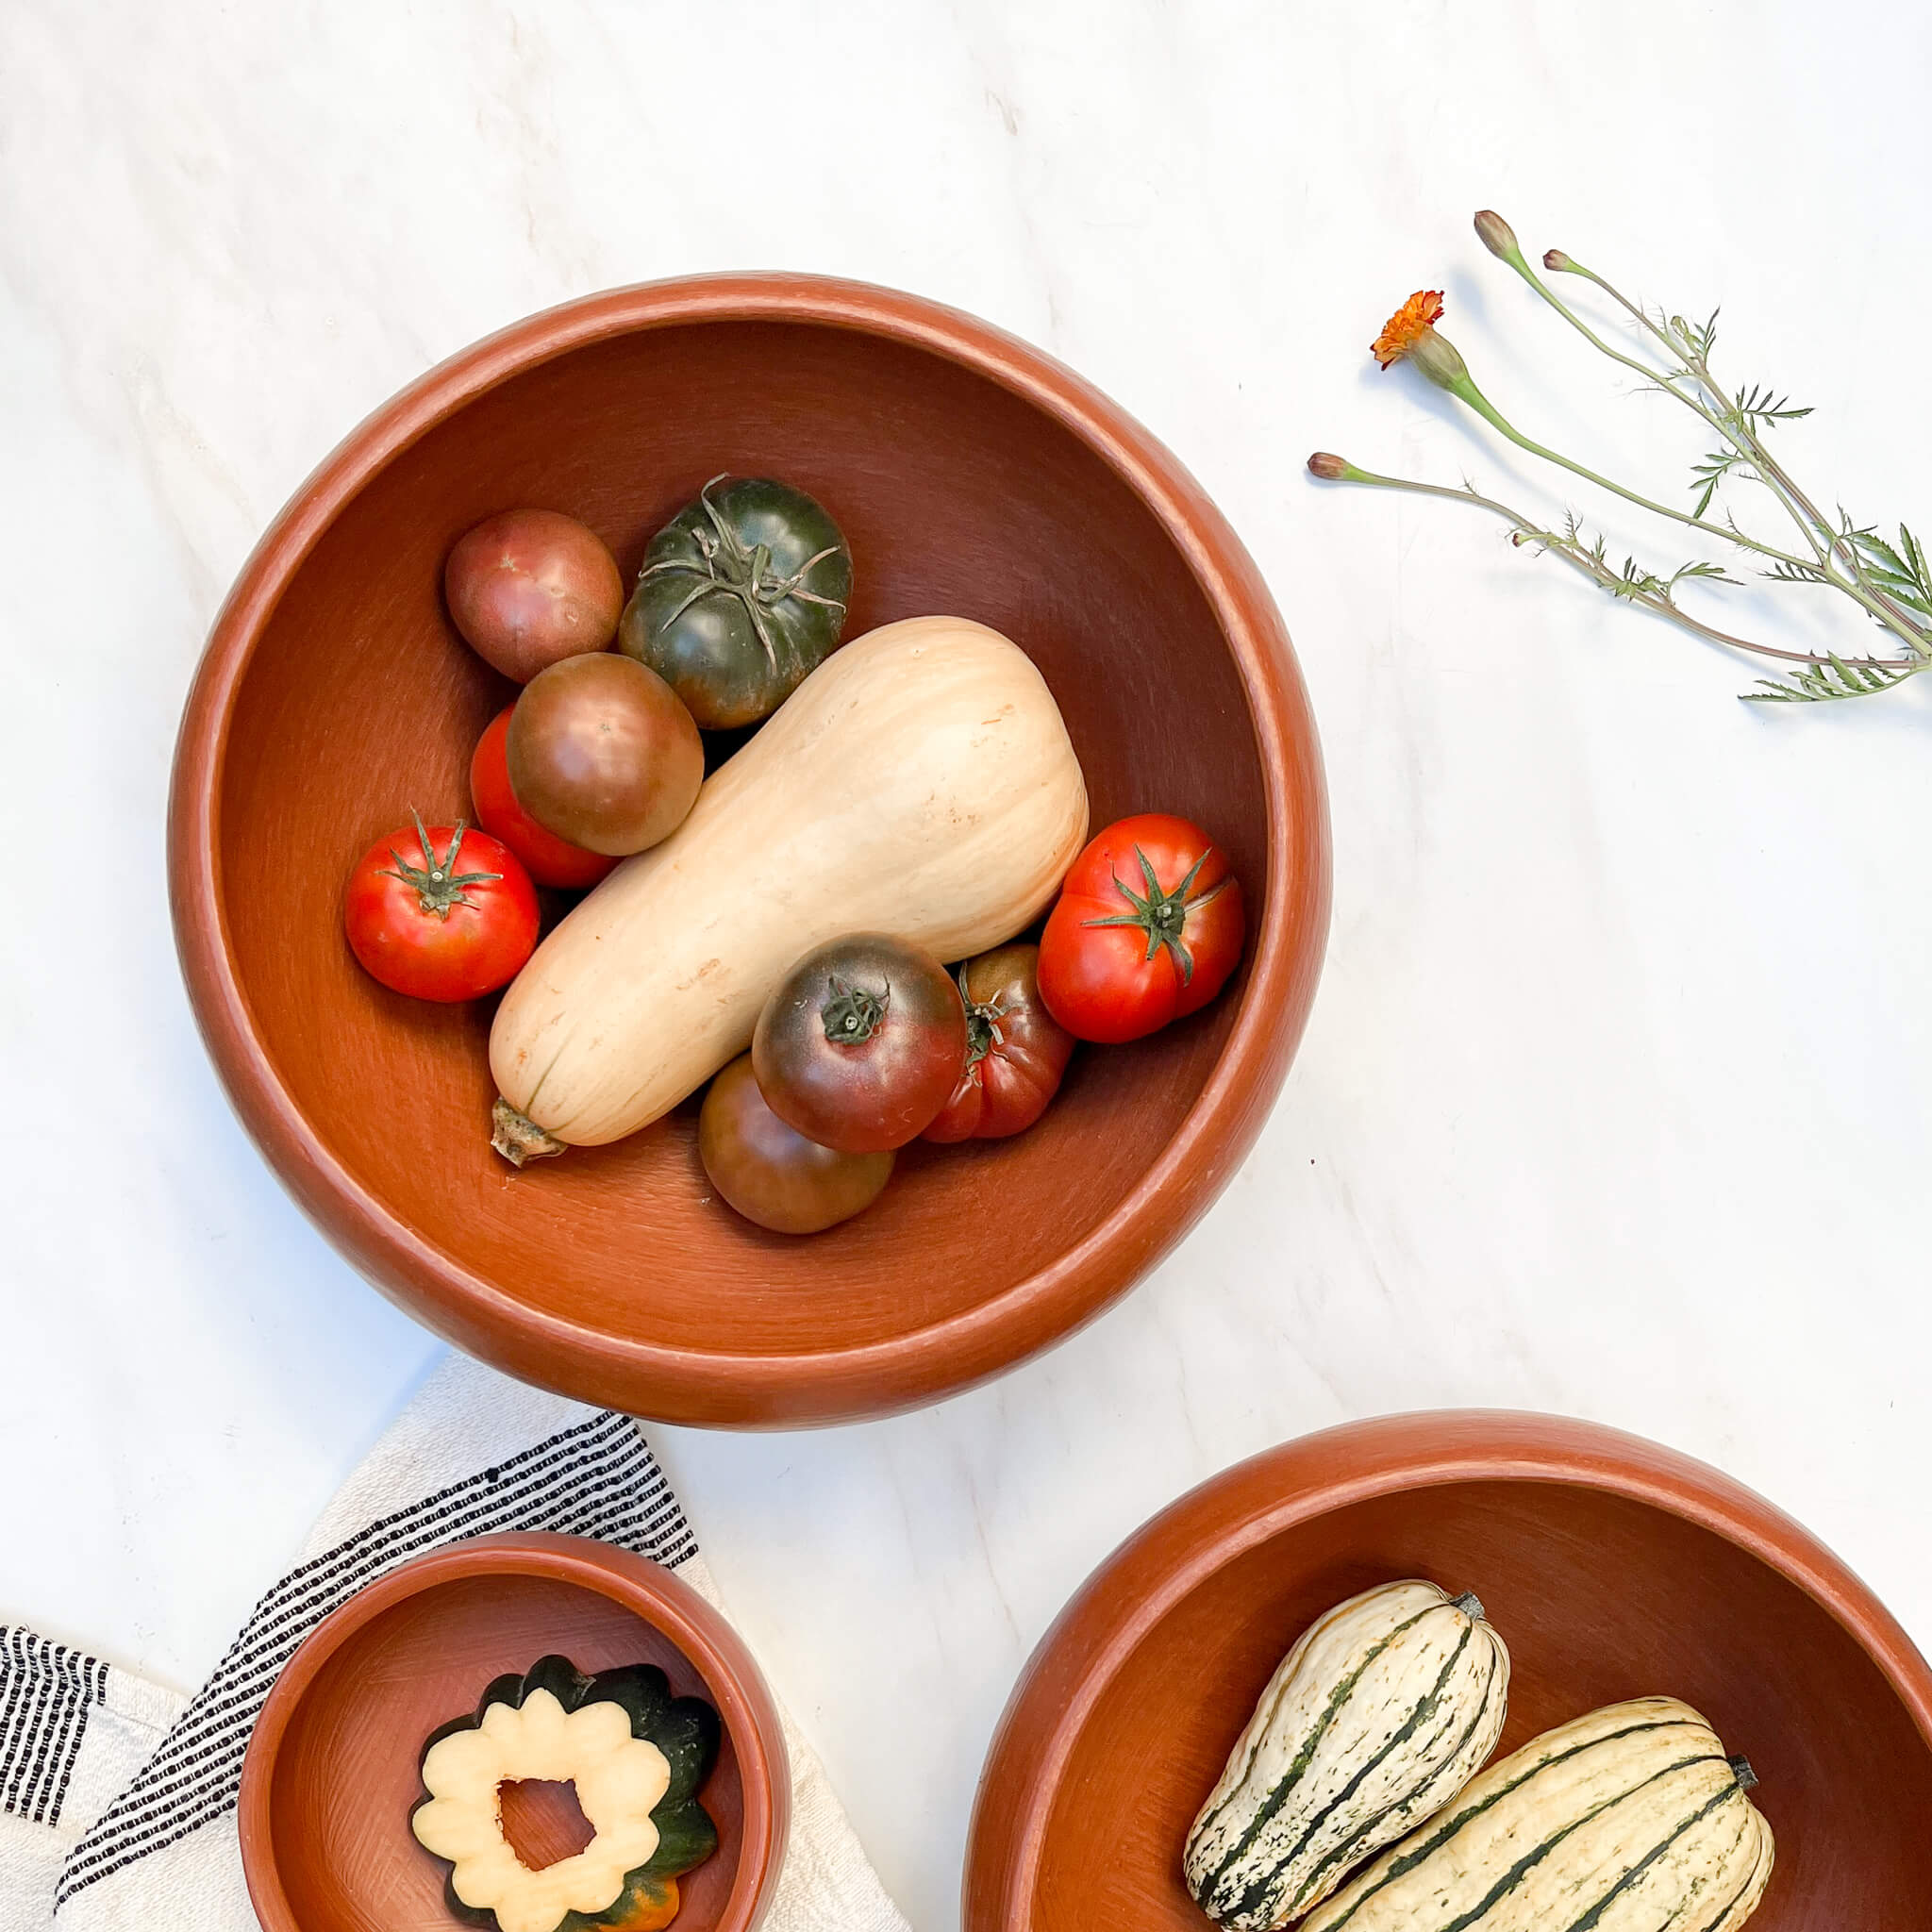 A set of 3 Oaxaca red clay bowls filled with vegetables.